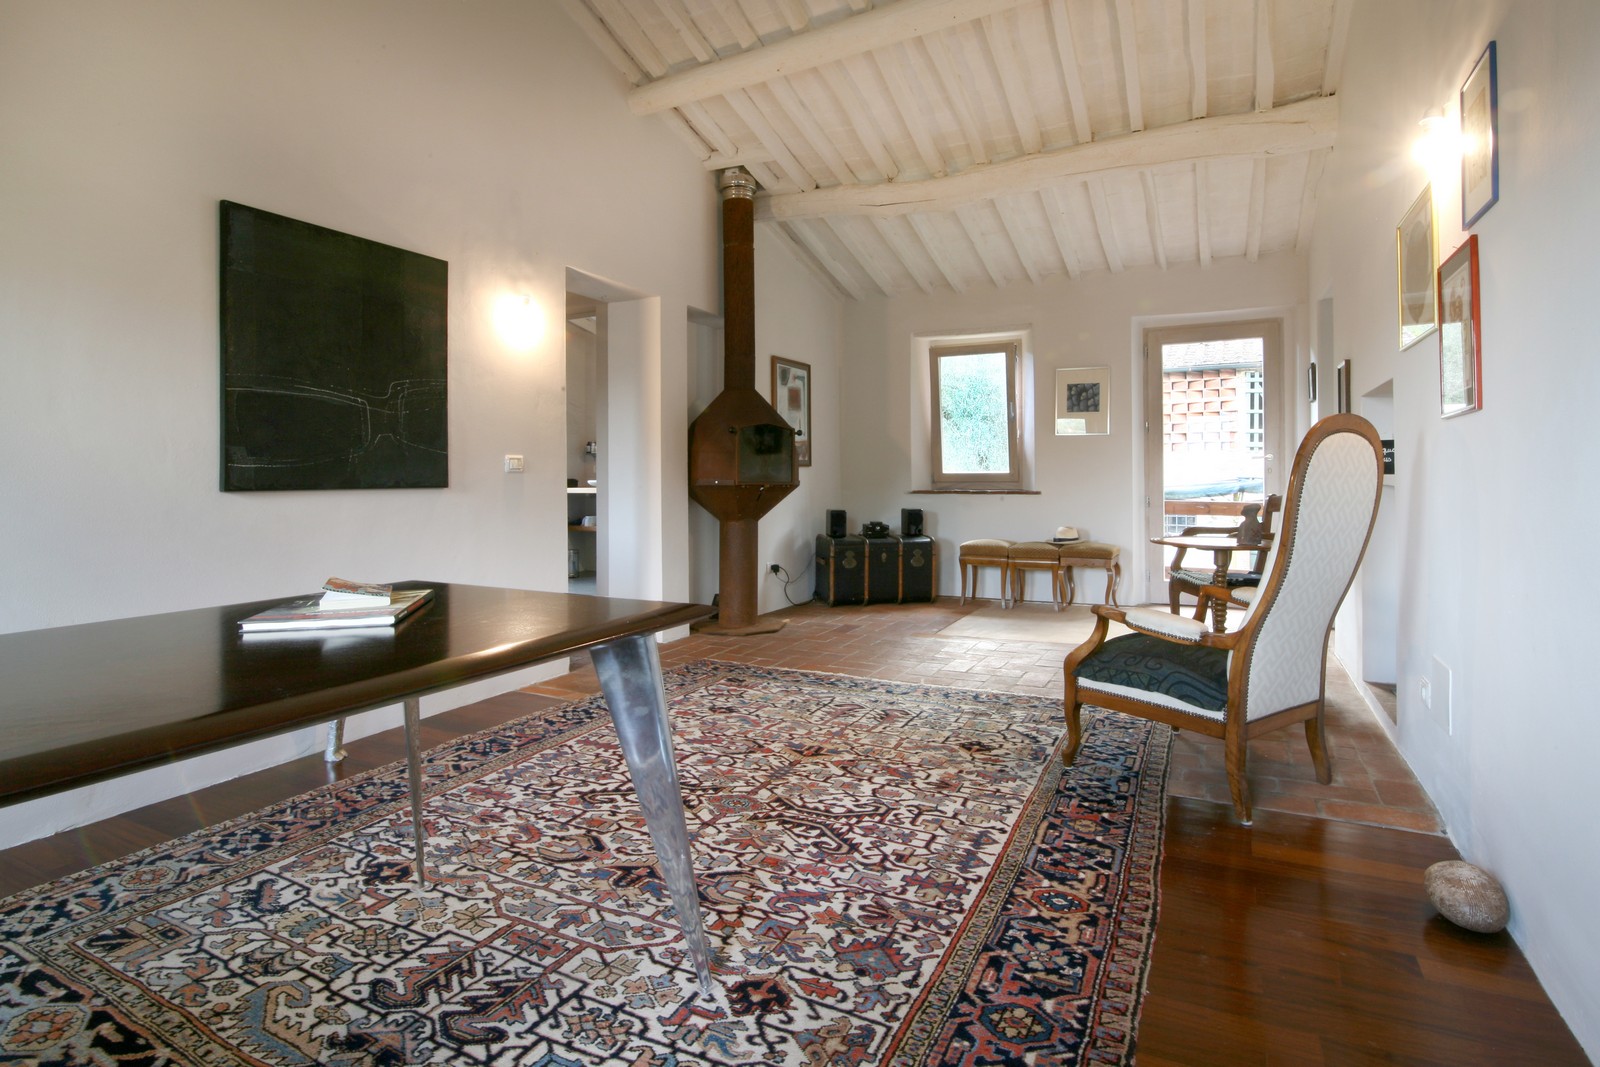 Restored Farmhouse between Camaiore and Lucca